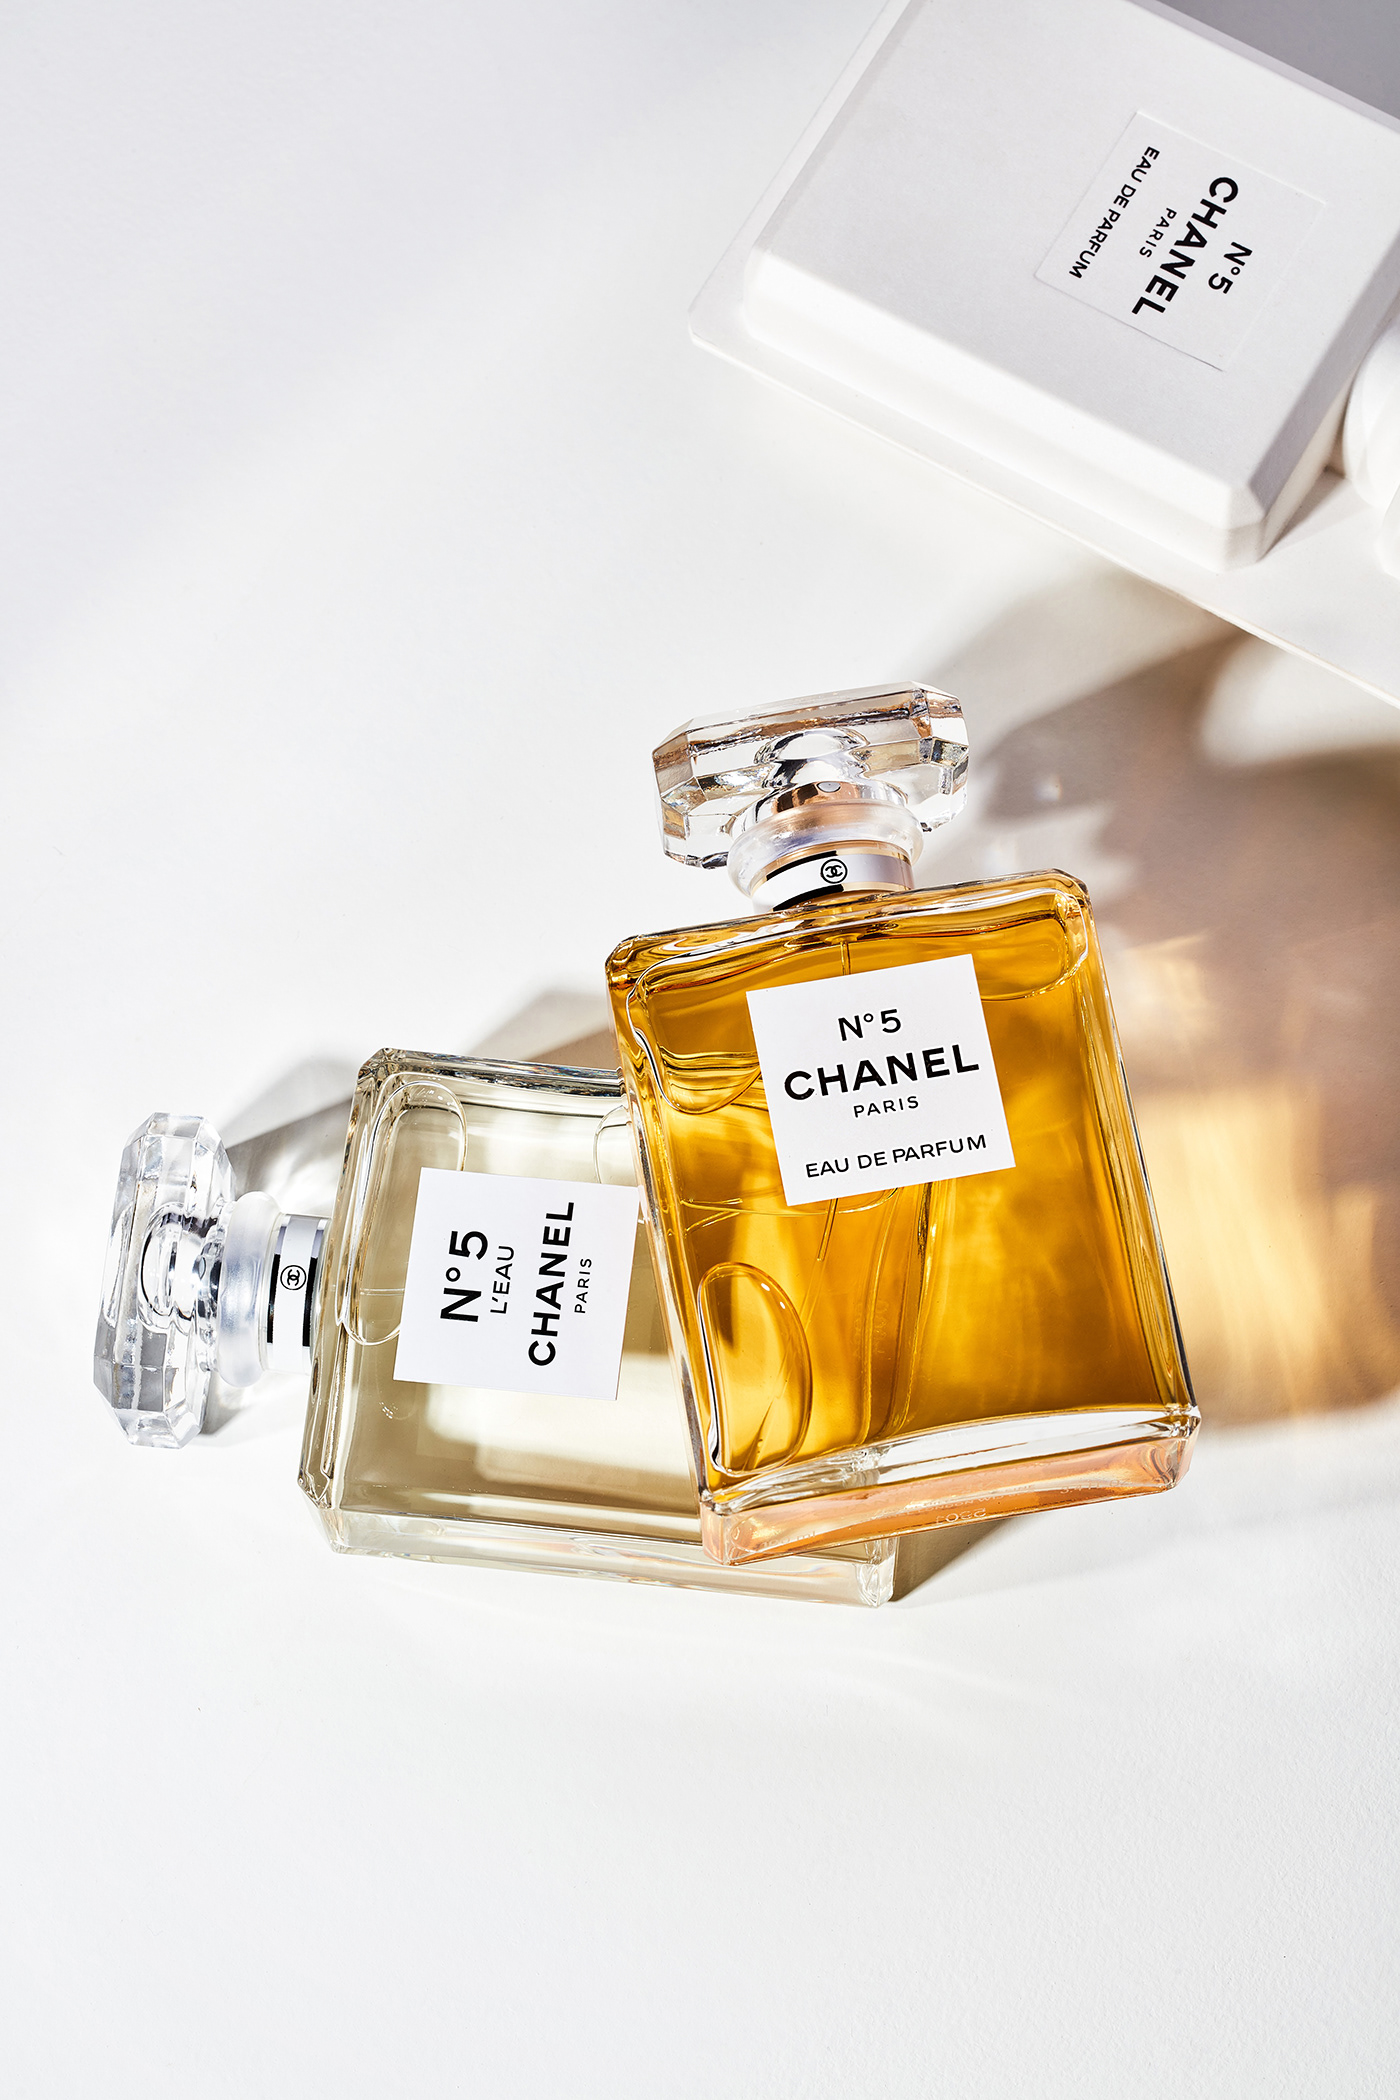 CHANEL No. 5 on Behance